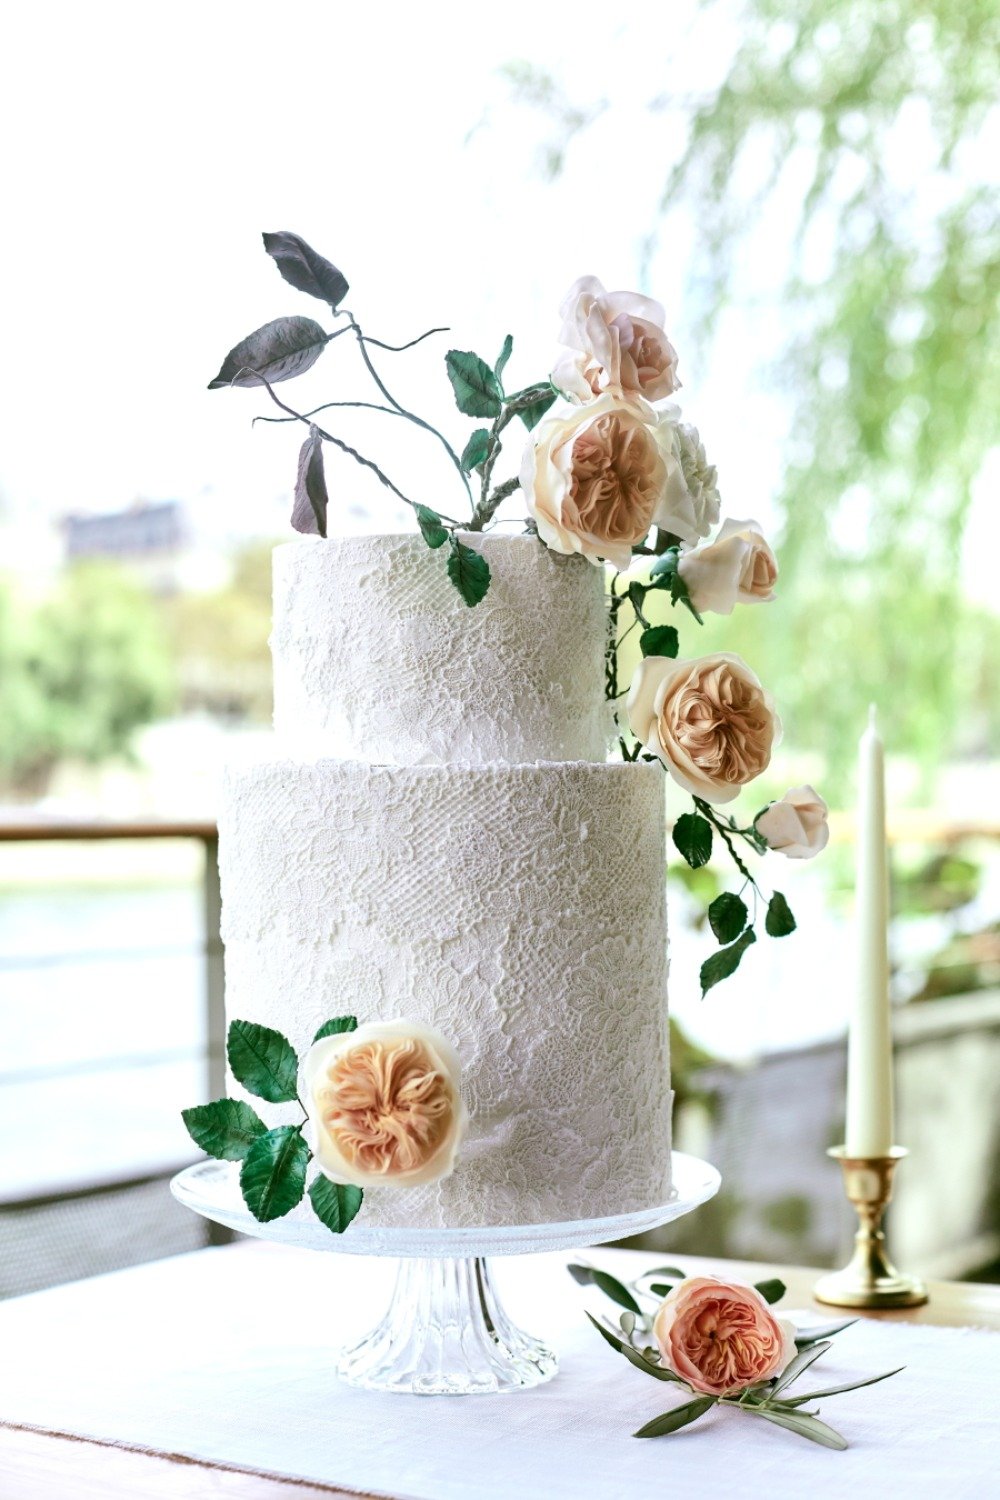 Lace wedding cake with florals